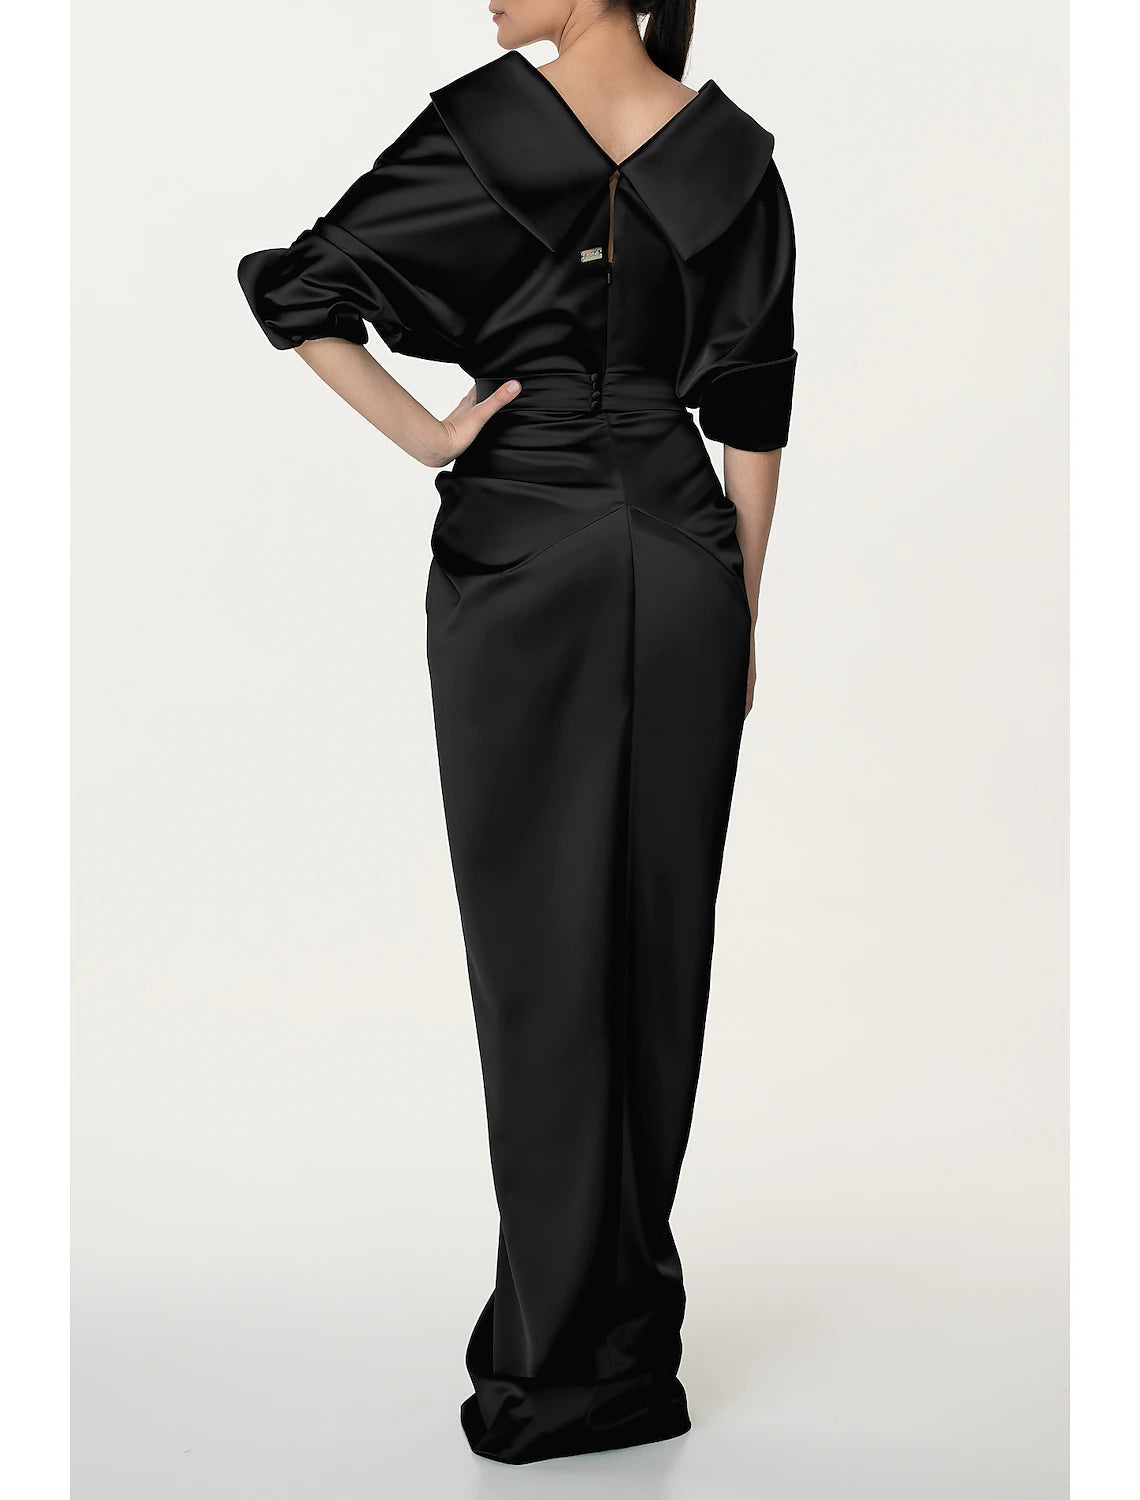 A-Line Evening Gown Black Dress Elegant Dress Formal Fall Sweep / Brush Train Half Sleeve V Neck Satin with Ruched